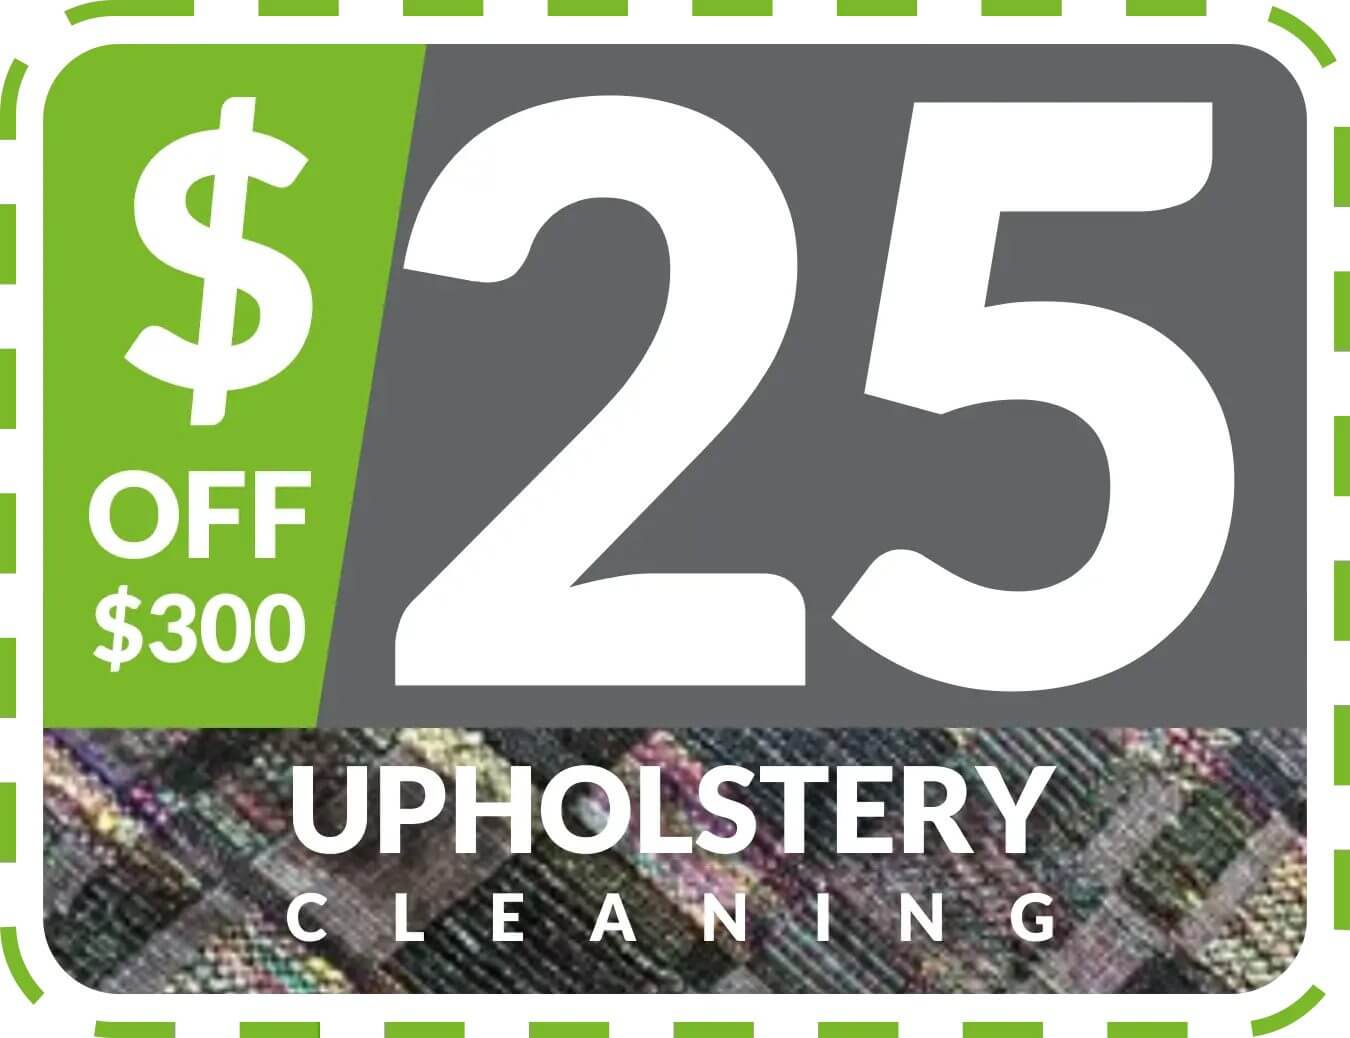 Upholstery Cleaning Discount